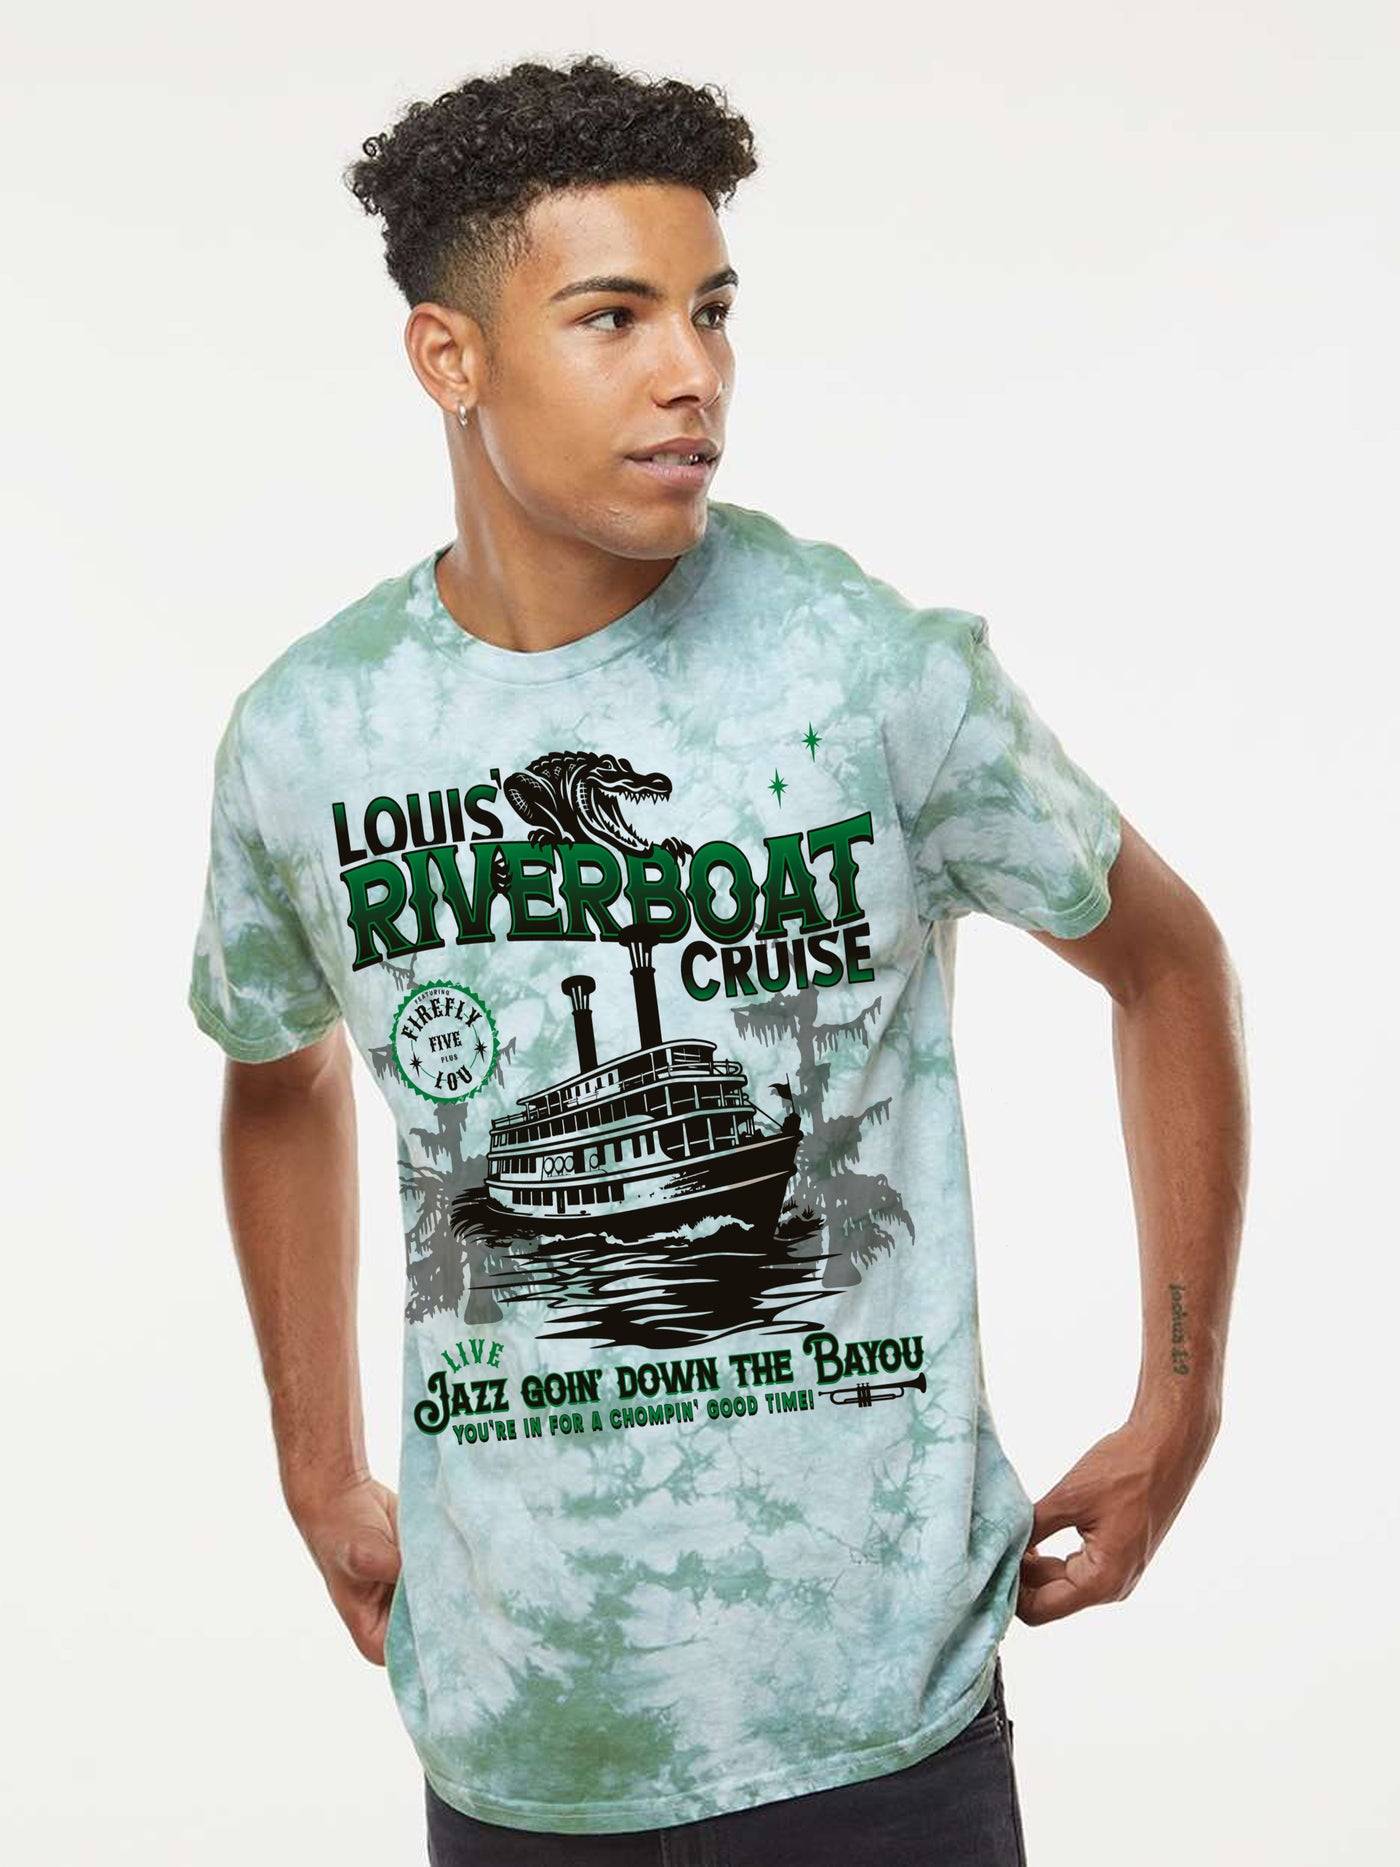 Louis Riverboat Cruise Tie Dye Shirt (Limited Edition)